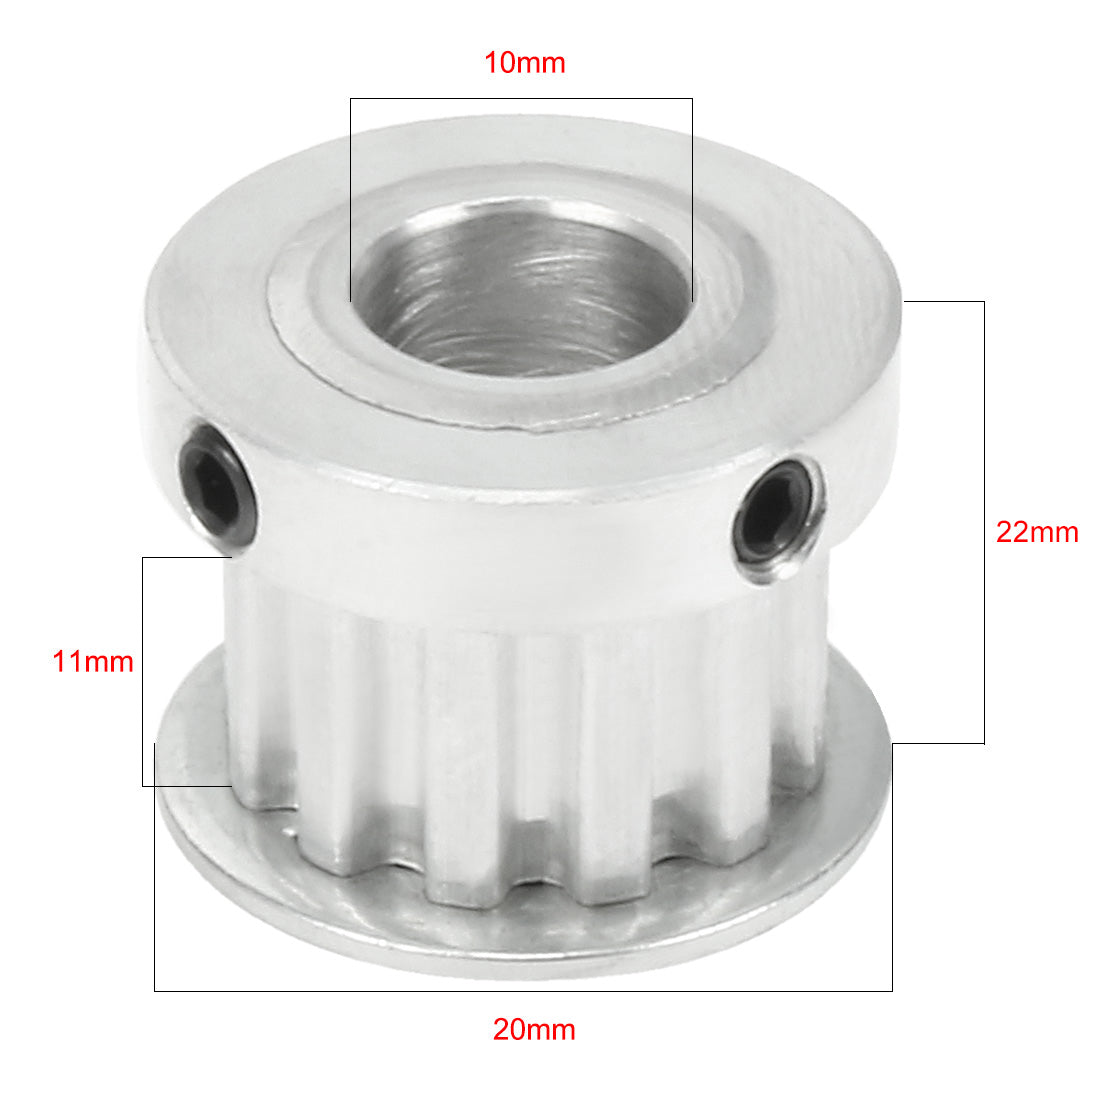 uxcell Uxcell Aluminum M-X-L 25 Teeth 10mm Bore Timing Belt Idler Pulley Flange Synchronous Wheel for 10mm Belt 3D Printer CNC